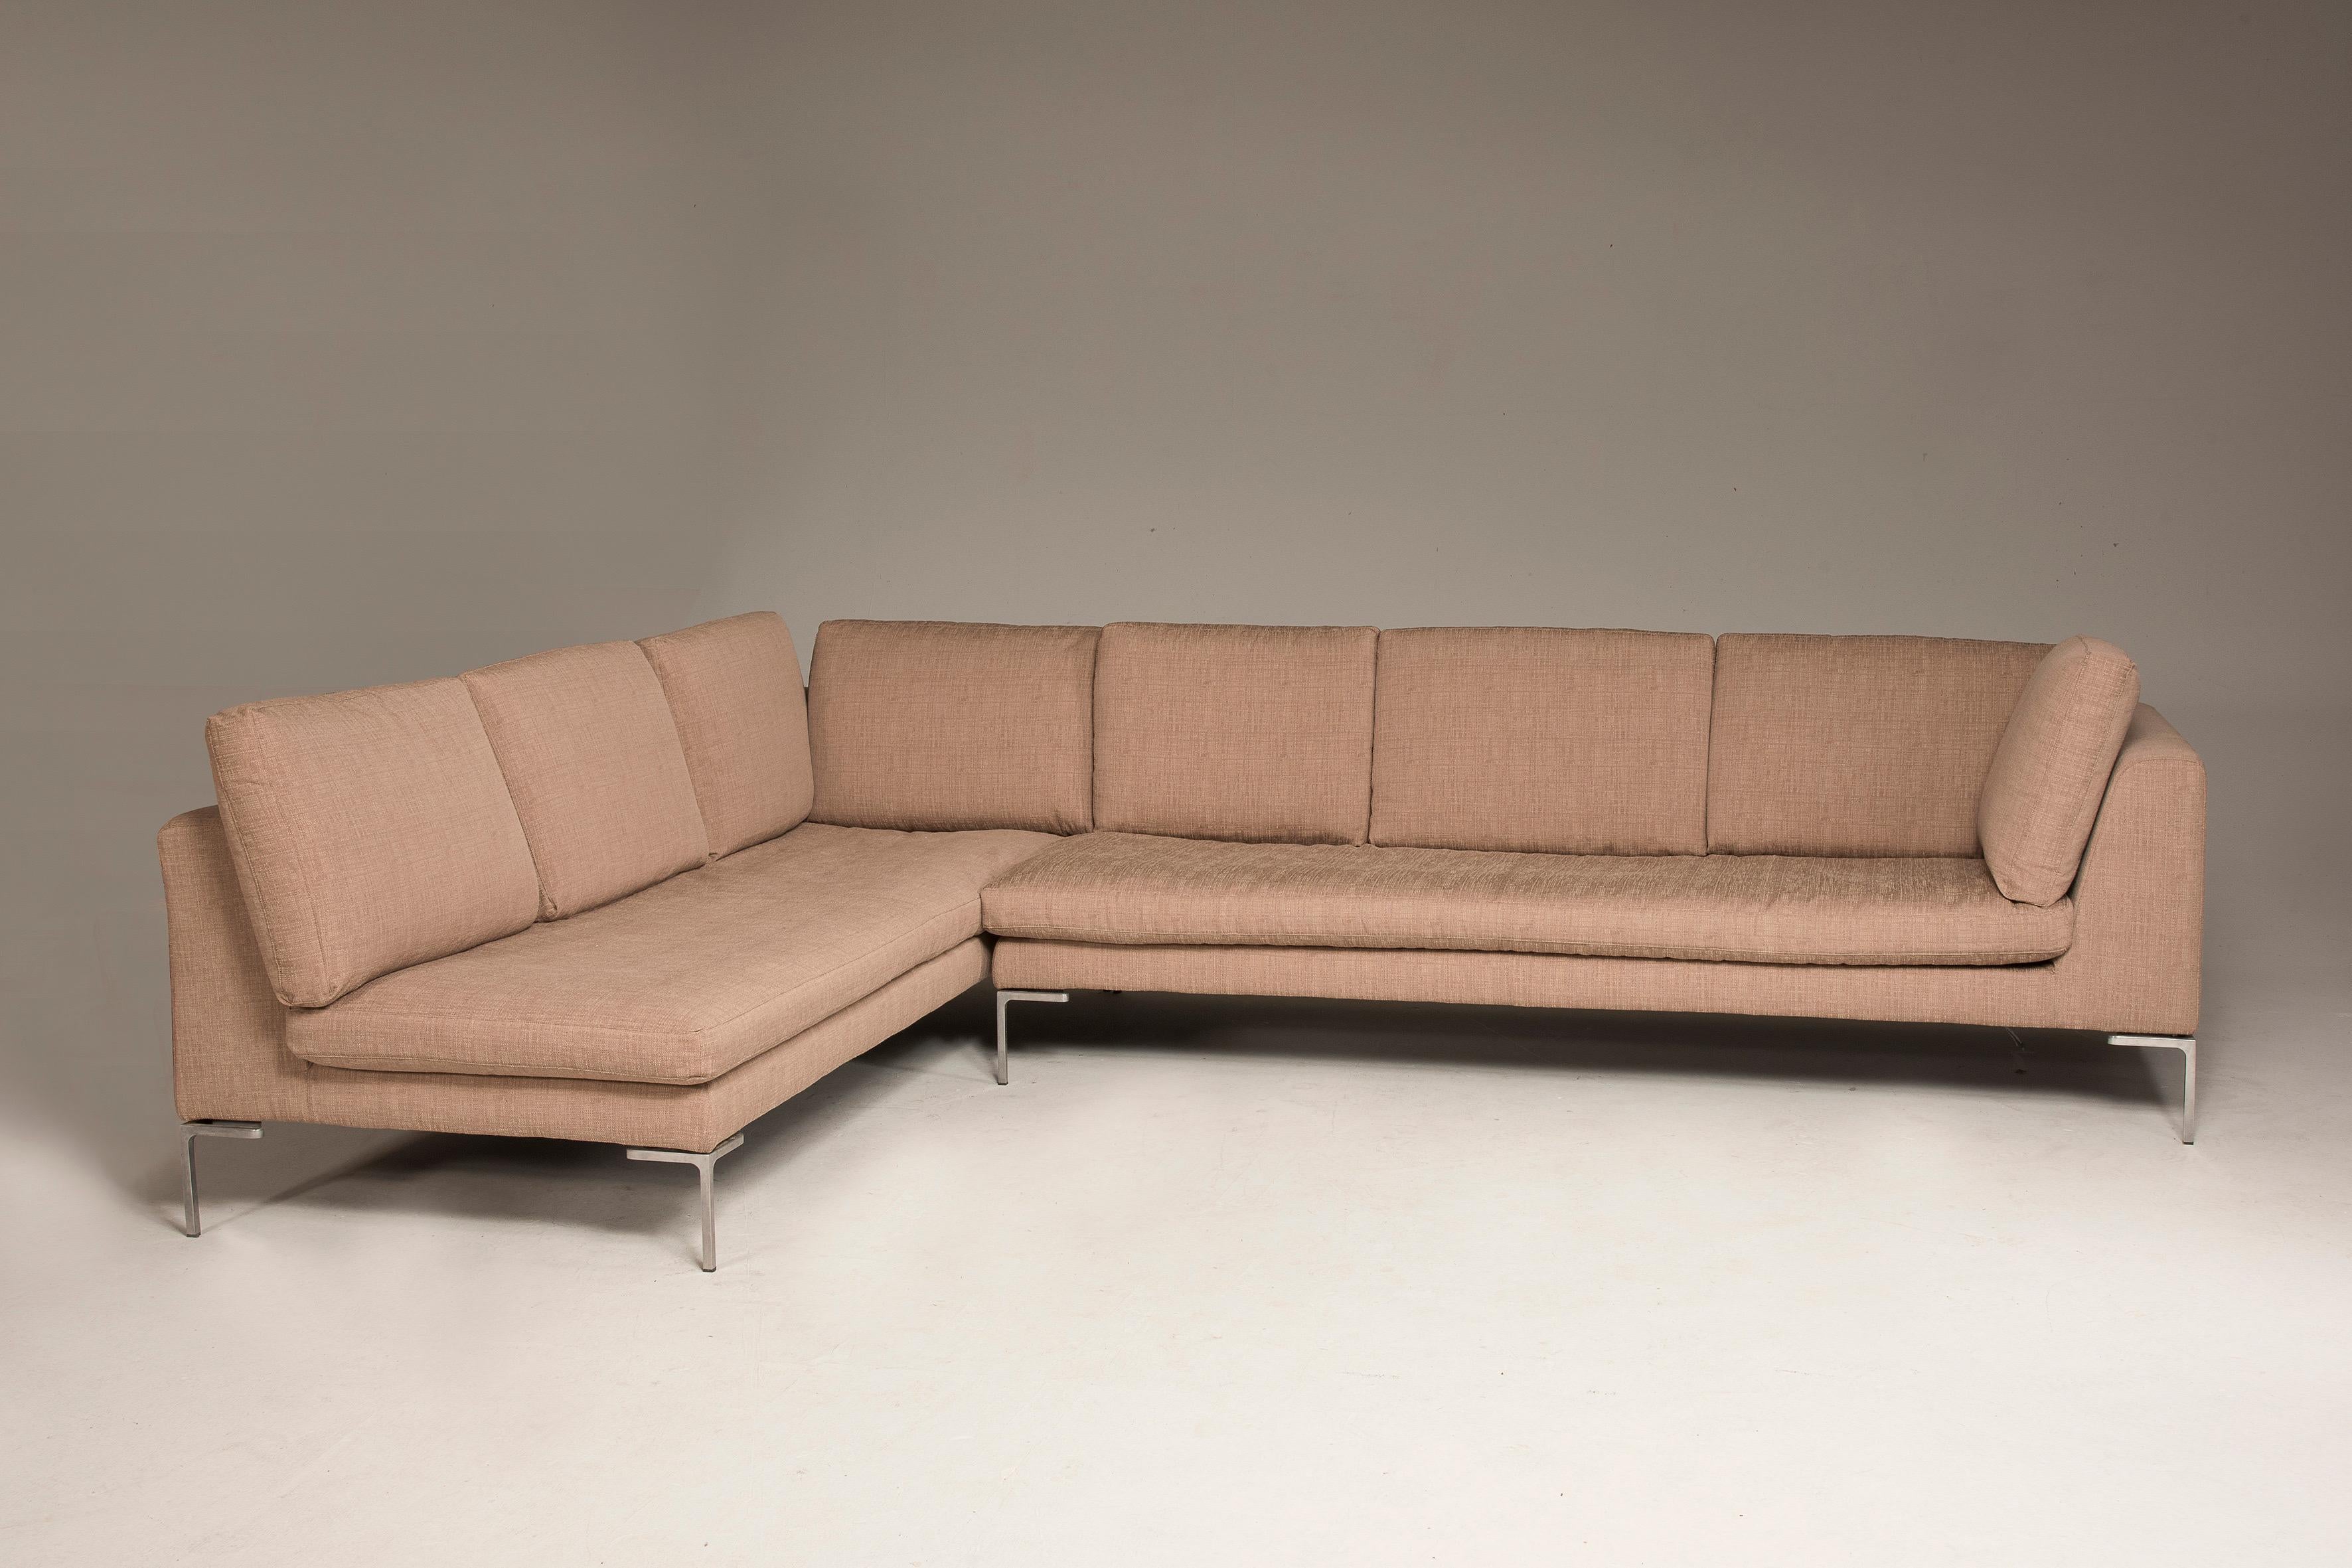 Charles Model by Antonio Citterio for B&B Italia Beige Color Sofà and Bench Set 3